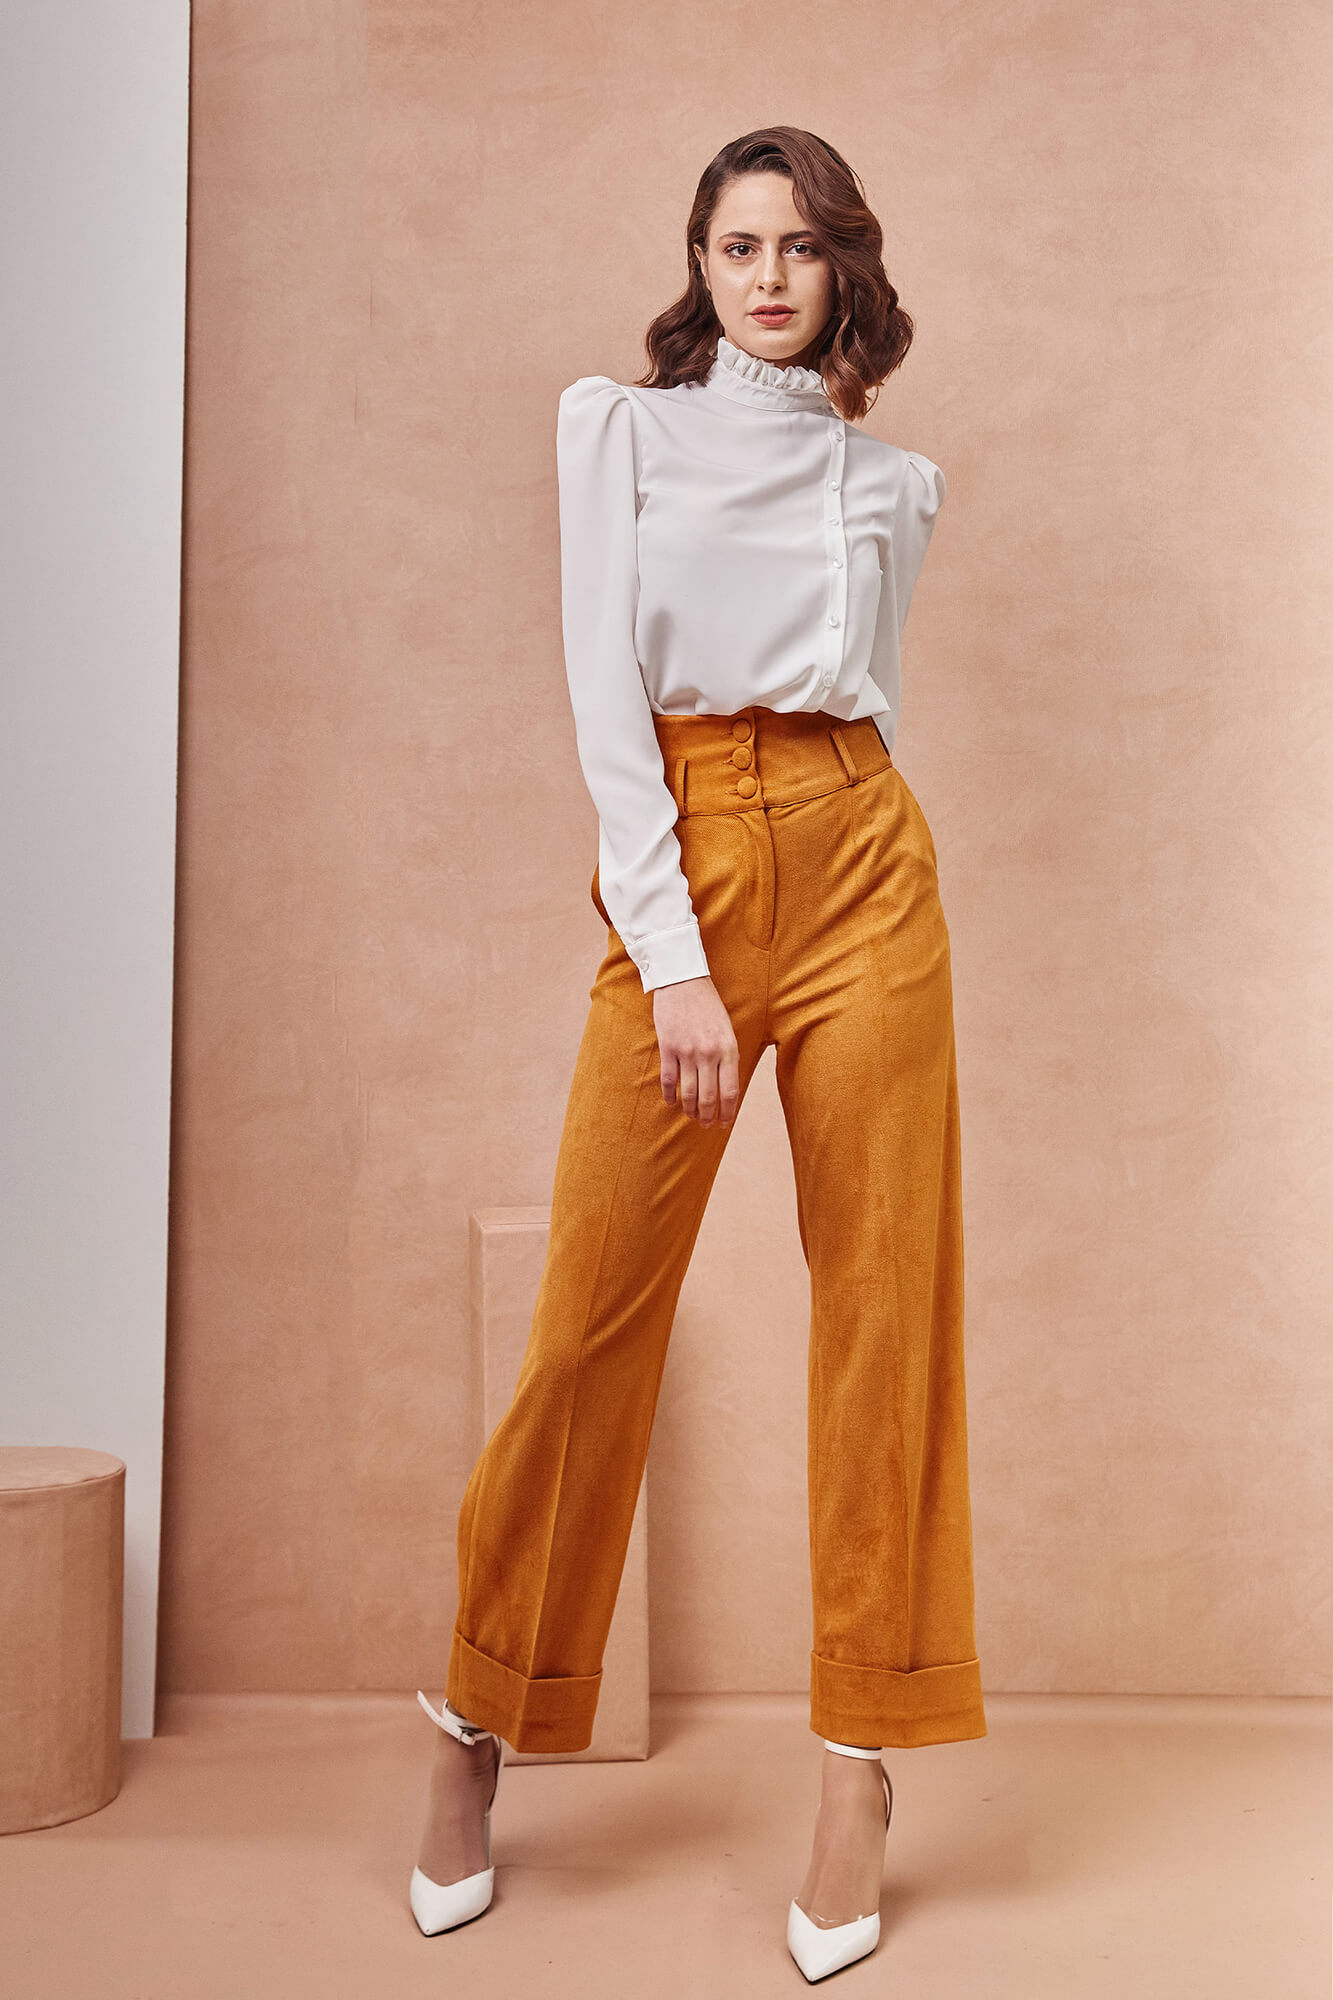 High Collar Side Button White Shirt with High Waisted Orange Pants